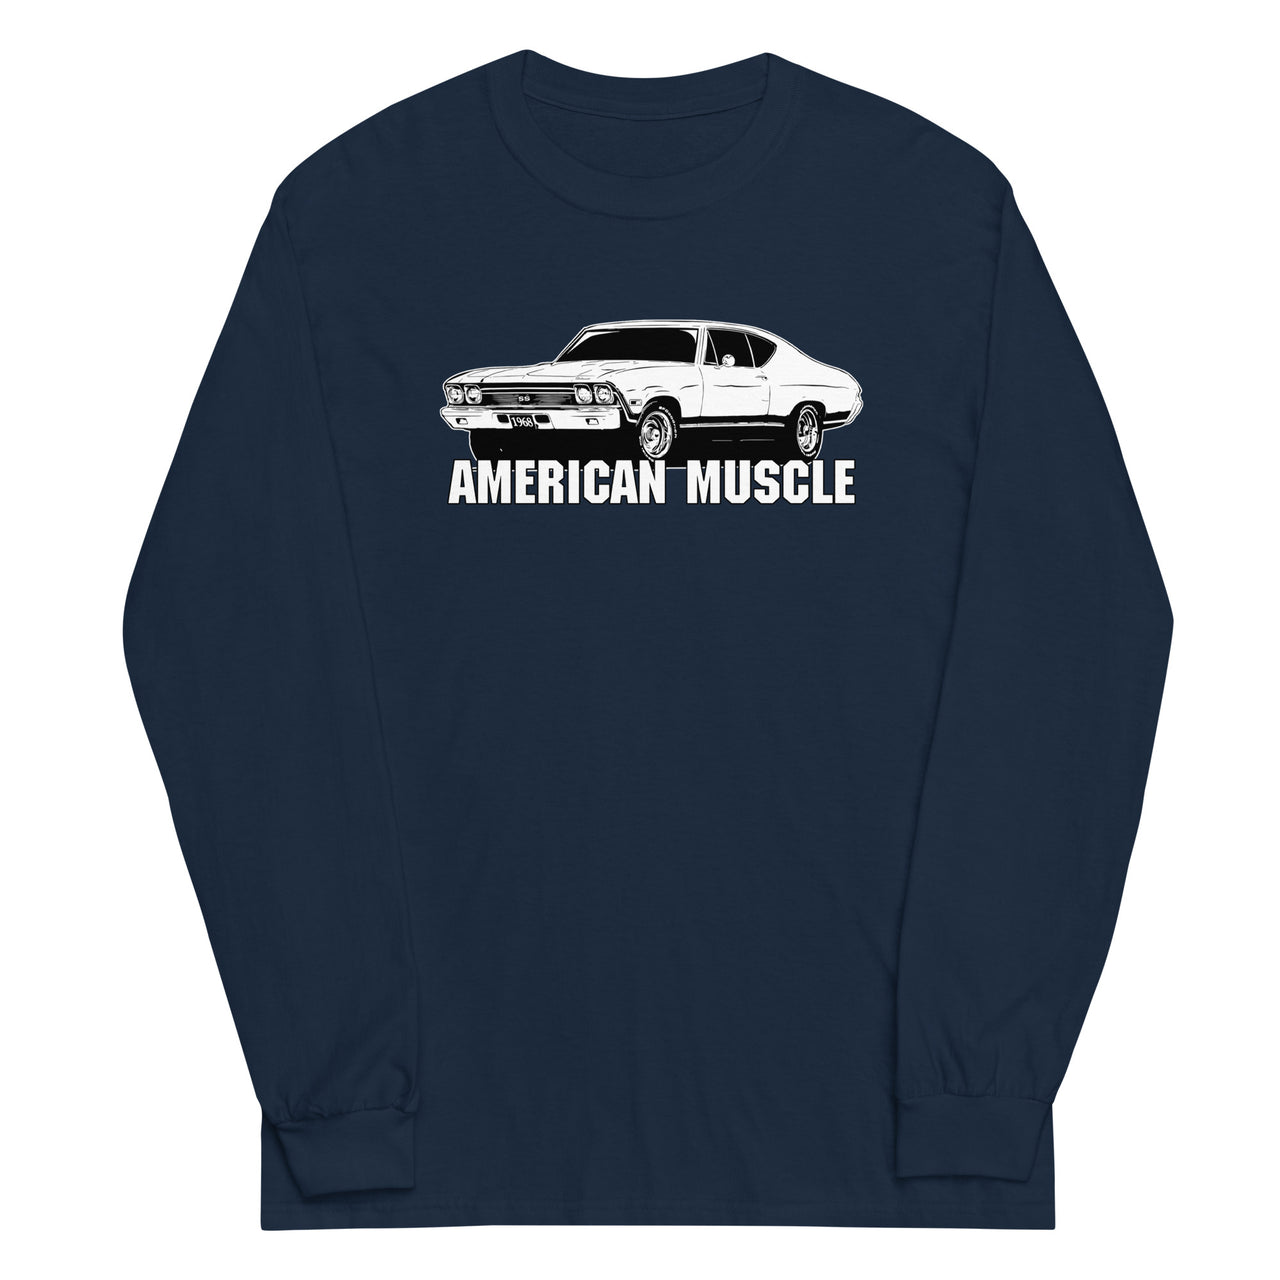 1968 Chevelle Long Sleeve Shirt in navy